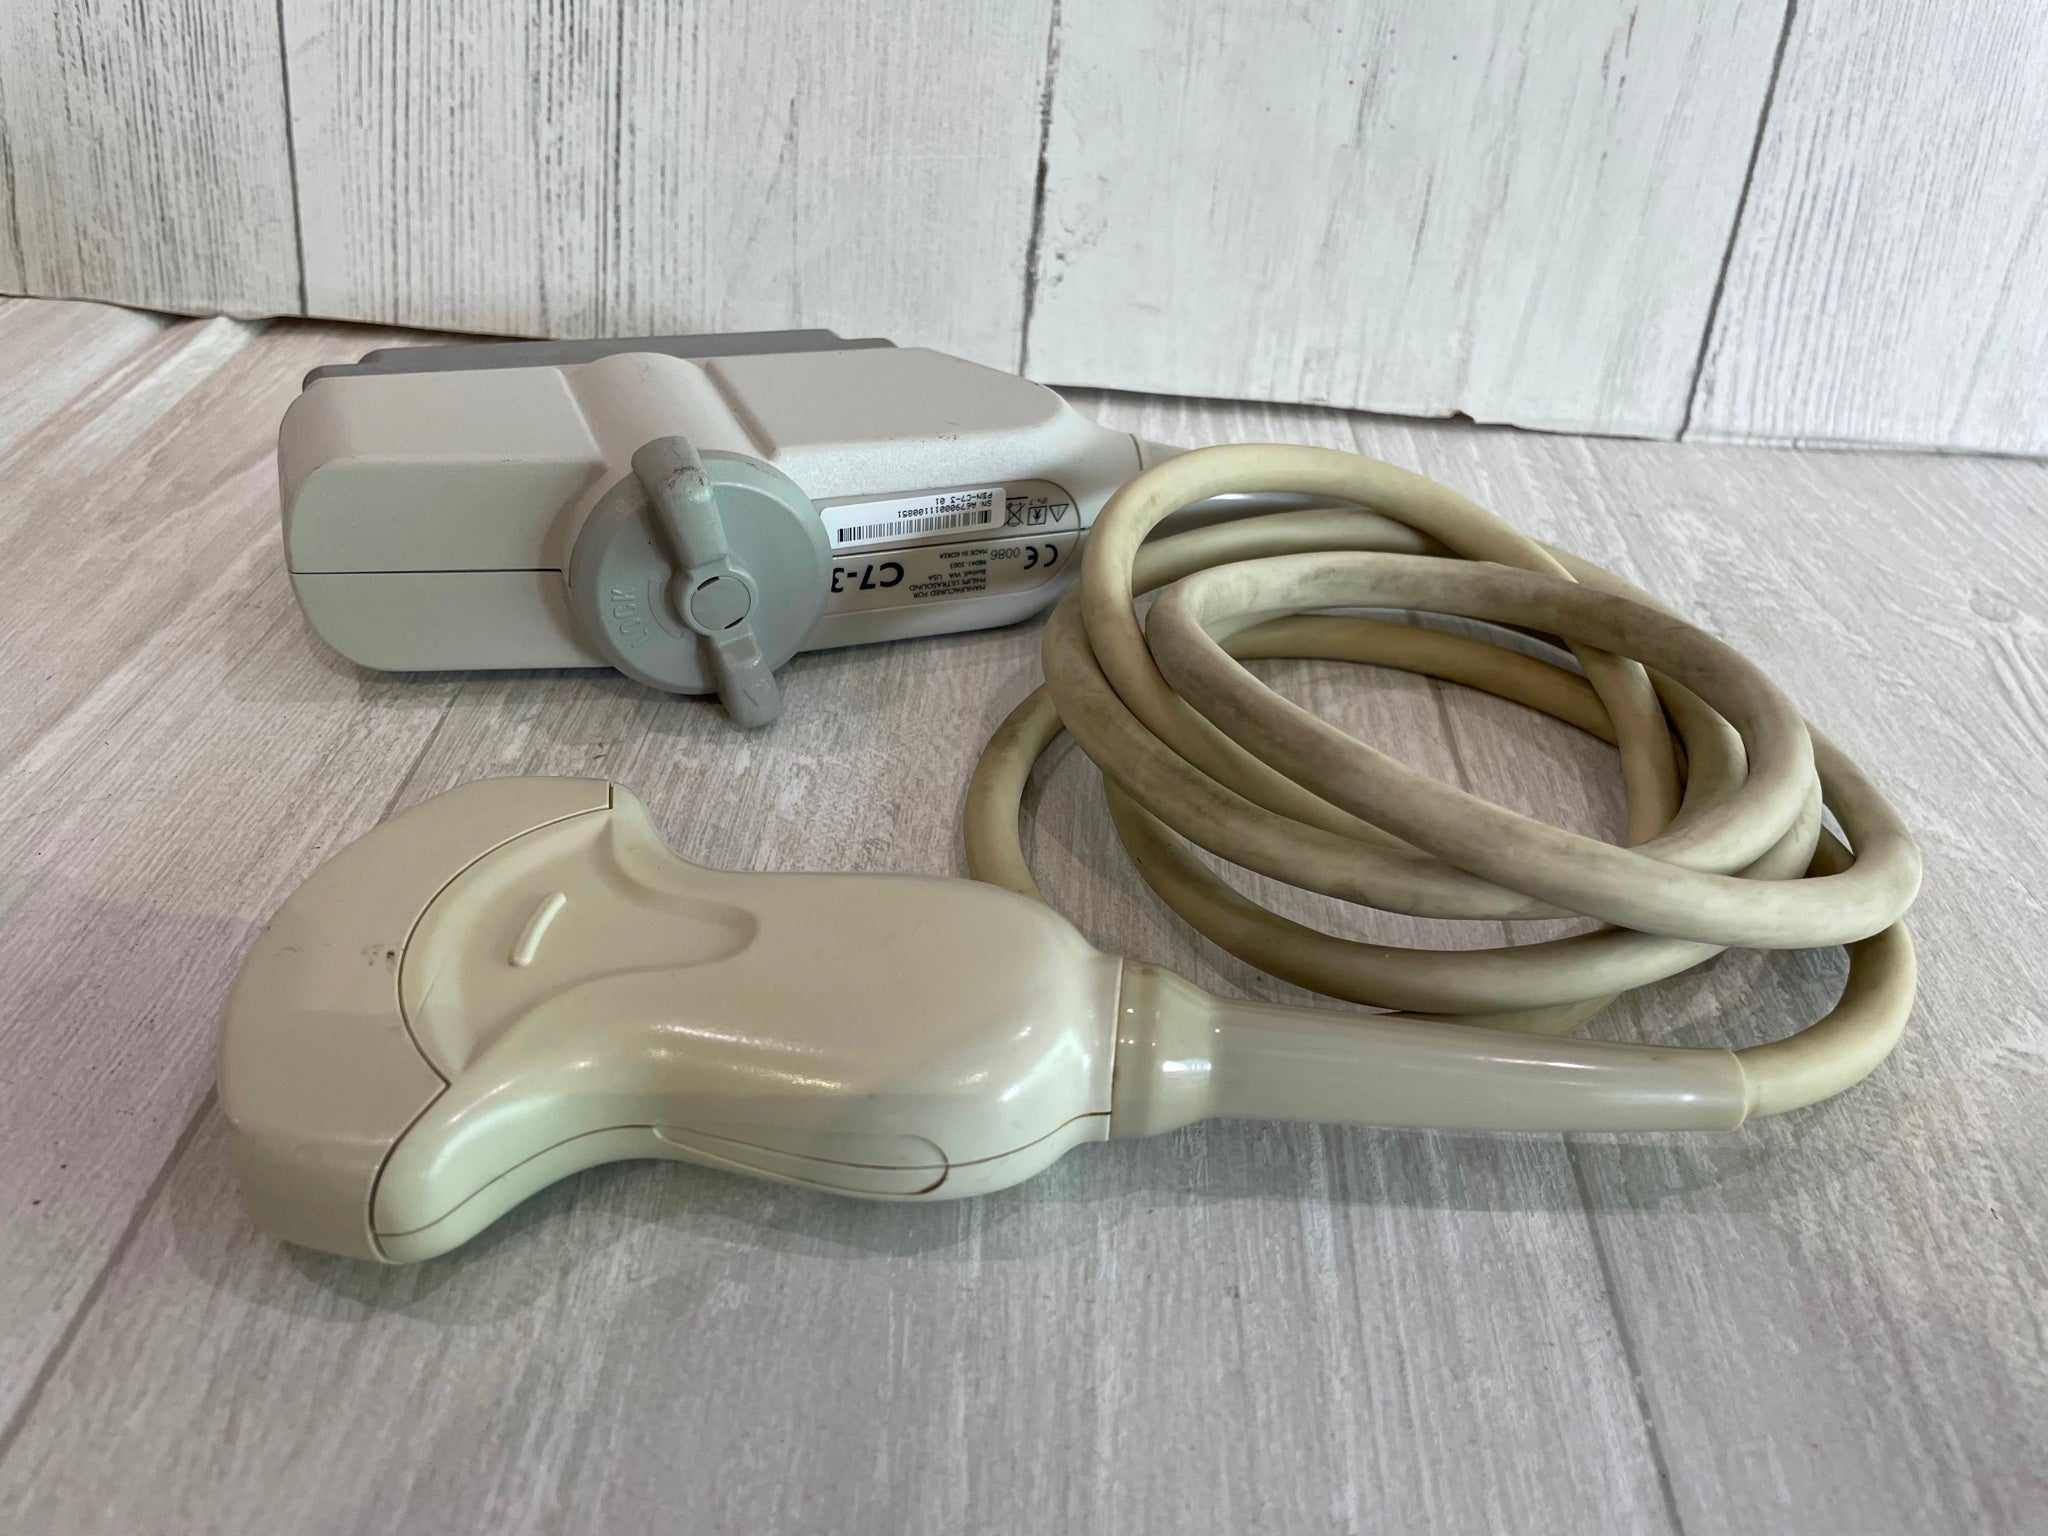 Philips C7-3 Ultrasound Probe Transducer DIAGNOSTIC ULTRASOUND MACHINES FOR SALE